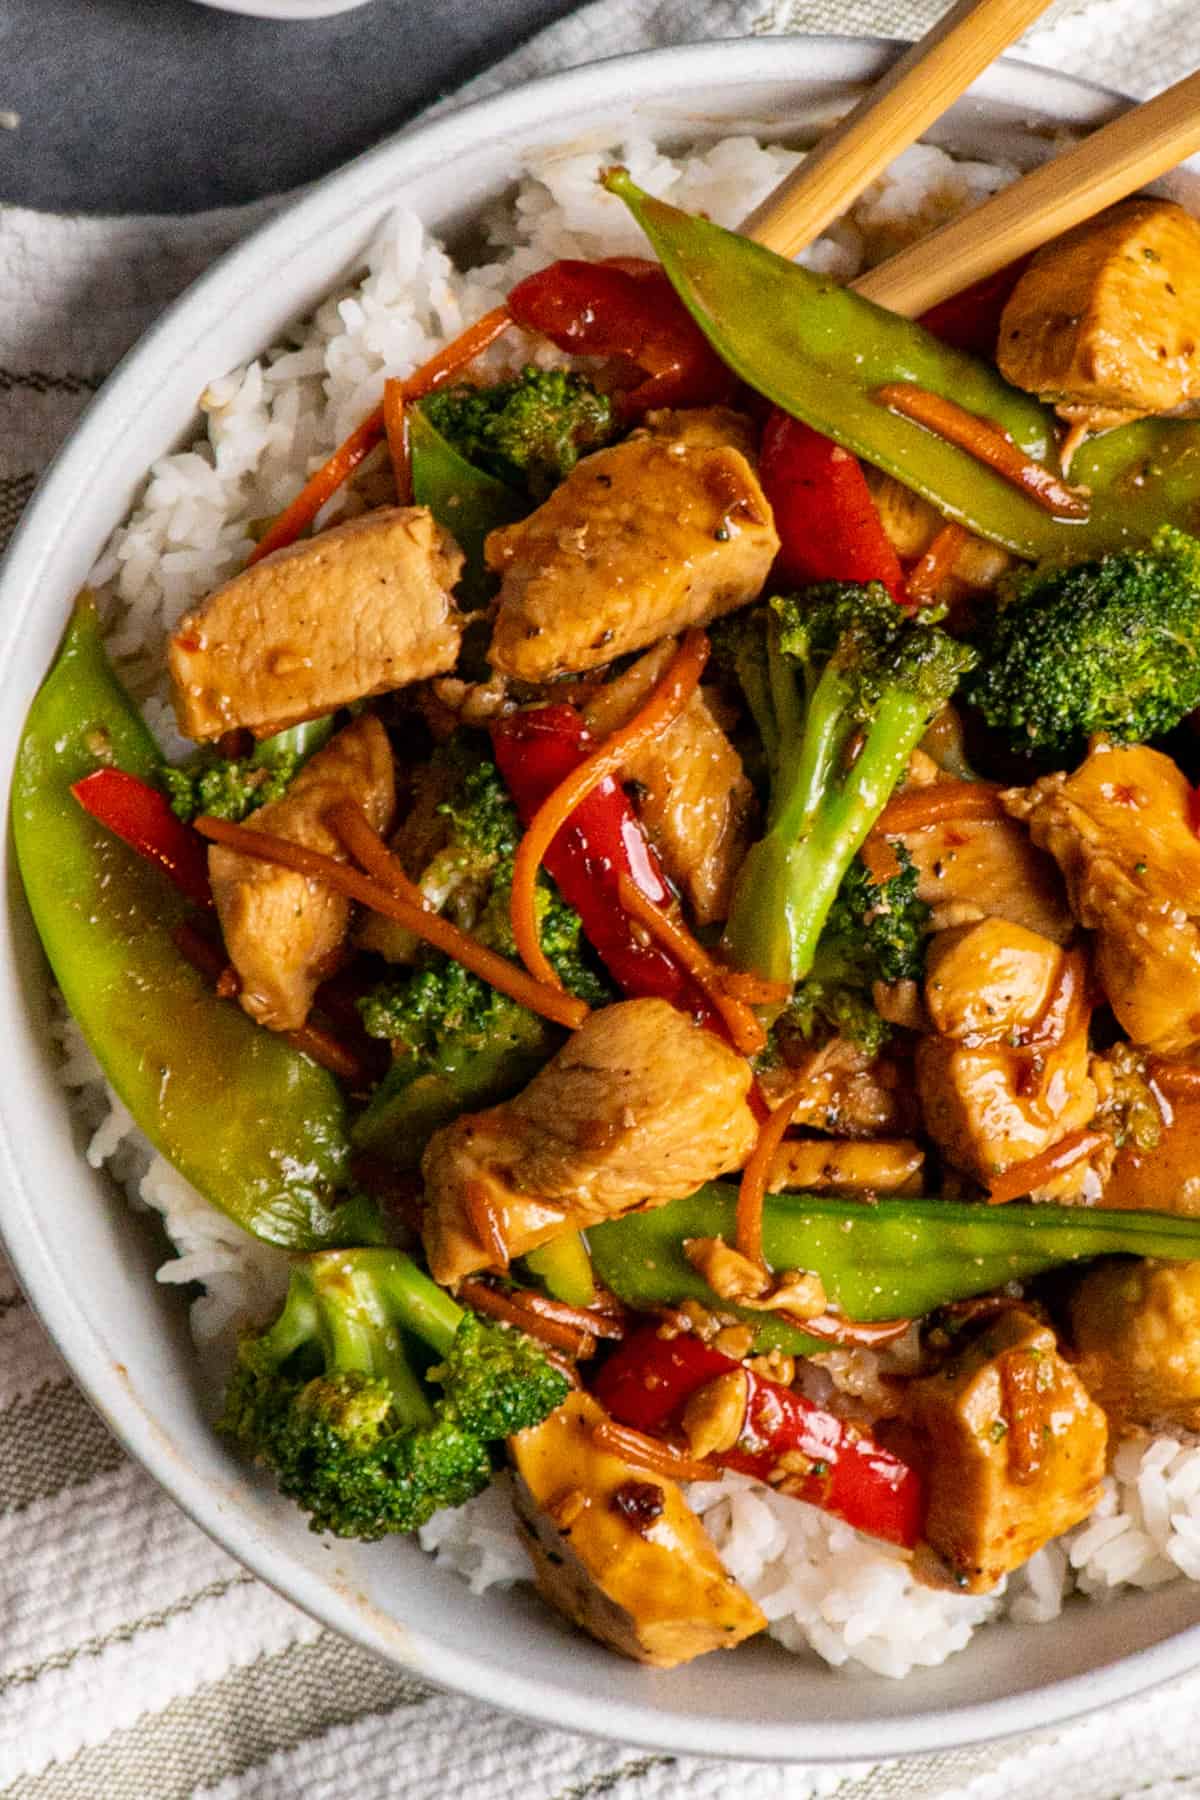 Overhead look of honey garlic chicken stir fry in a bowl over rice